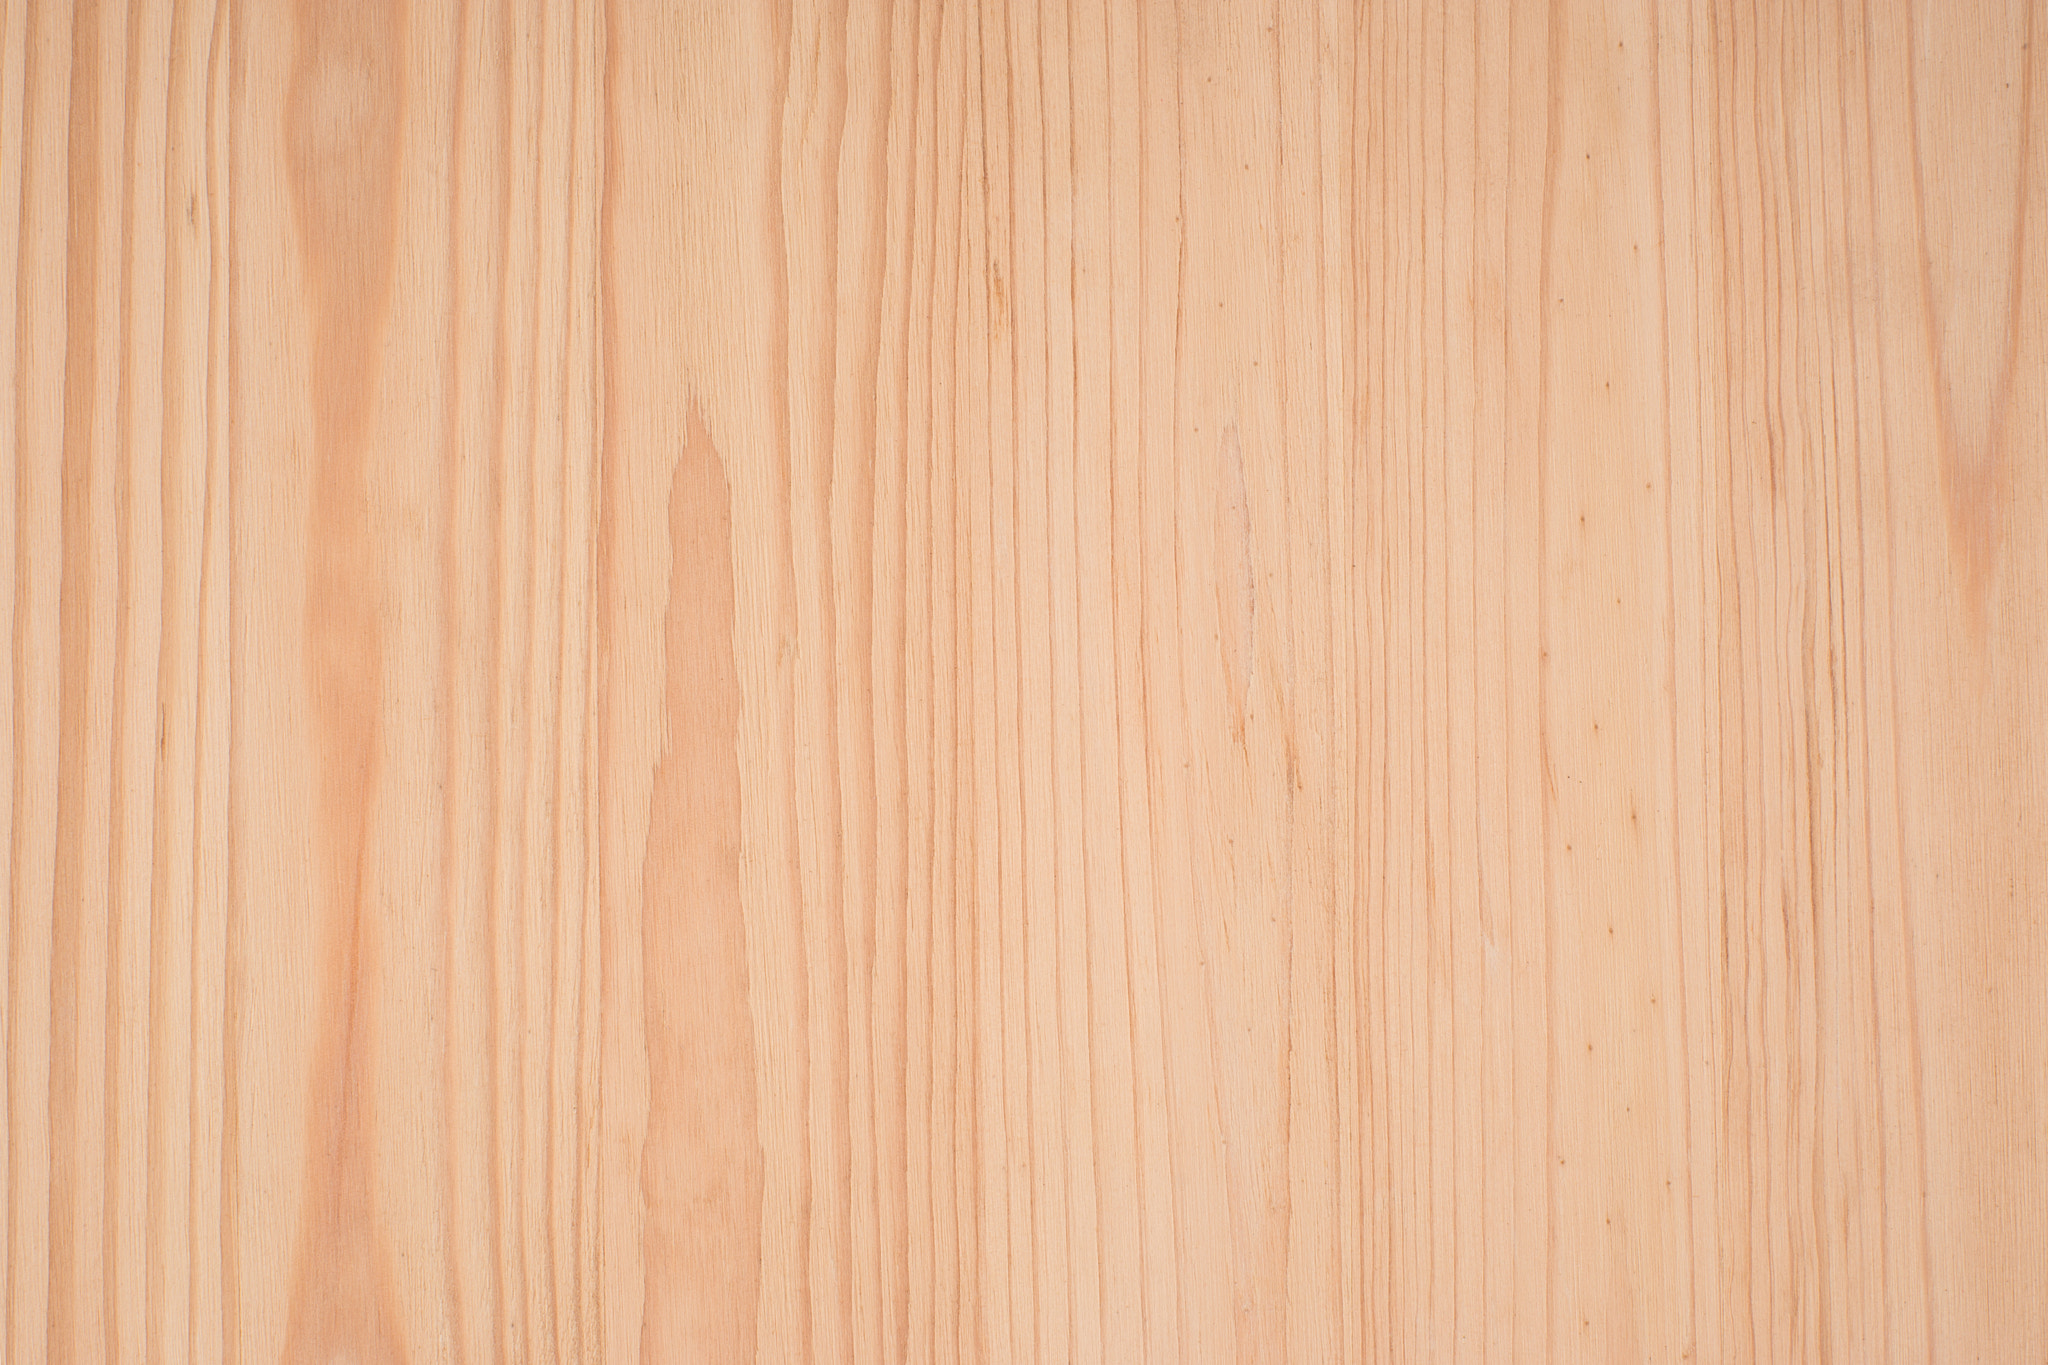 Sony a99 II sample photo. Texture of wood background close up. photography